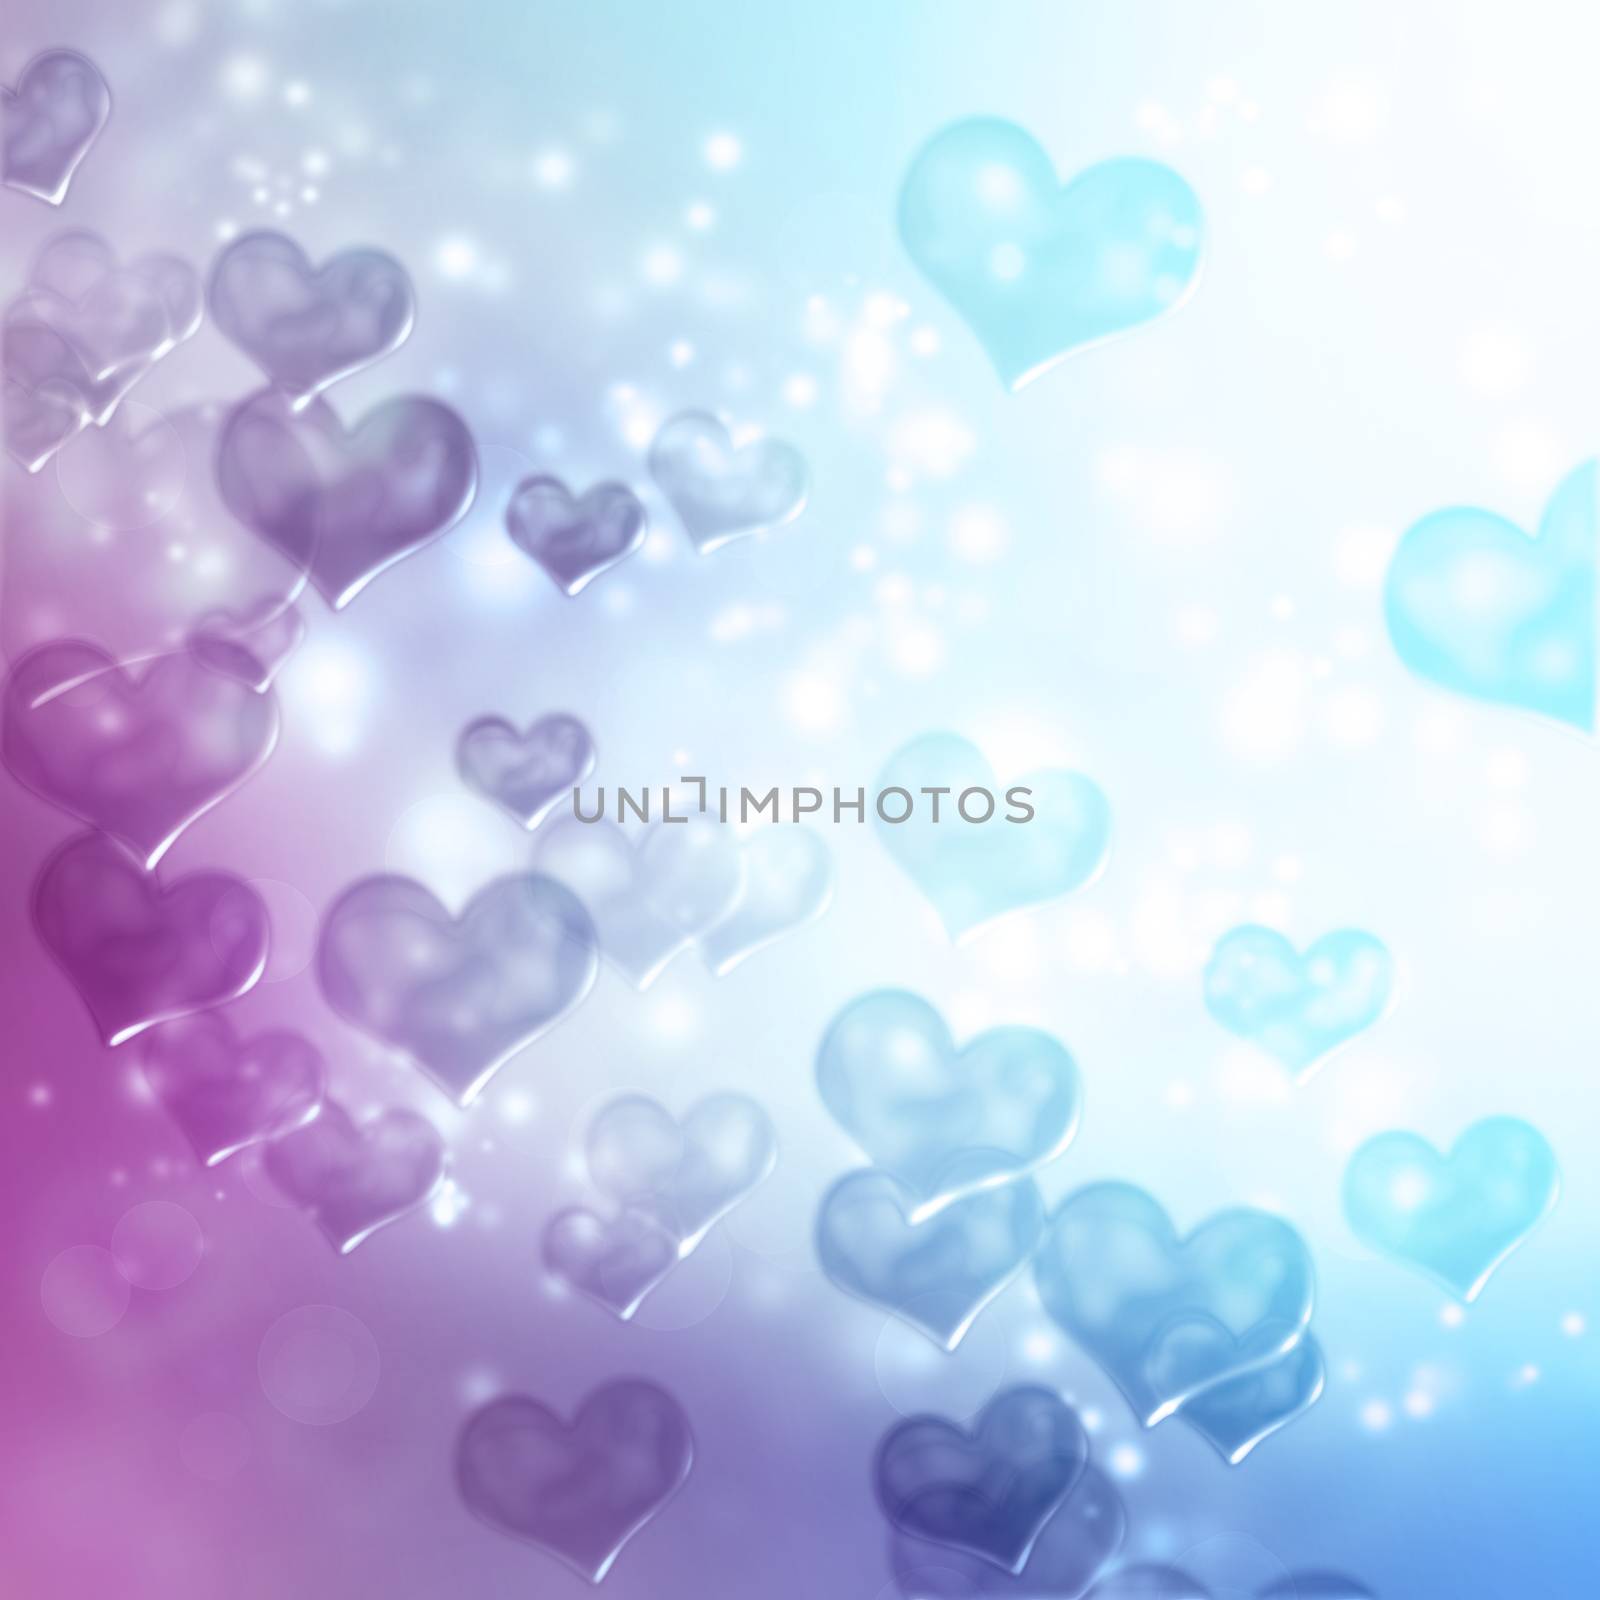 Hearts on blue and purple gradient background